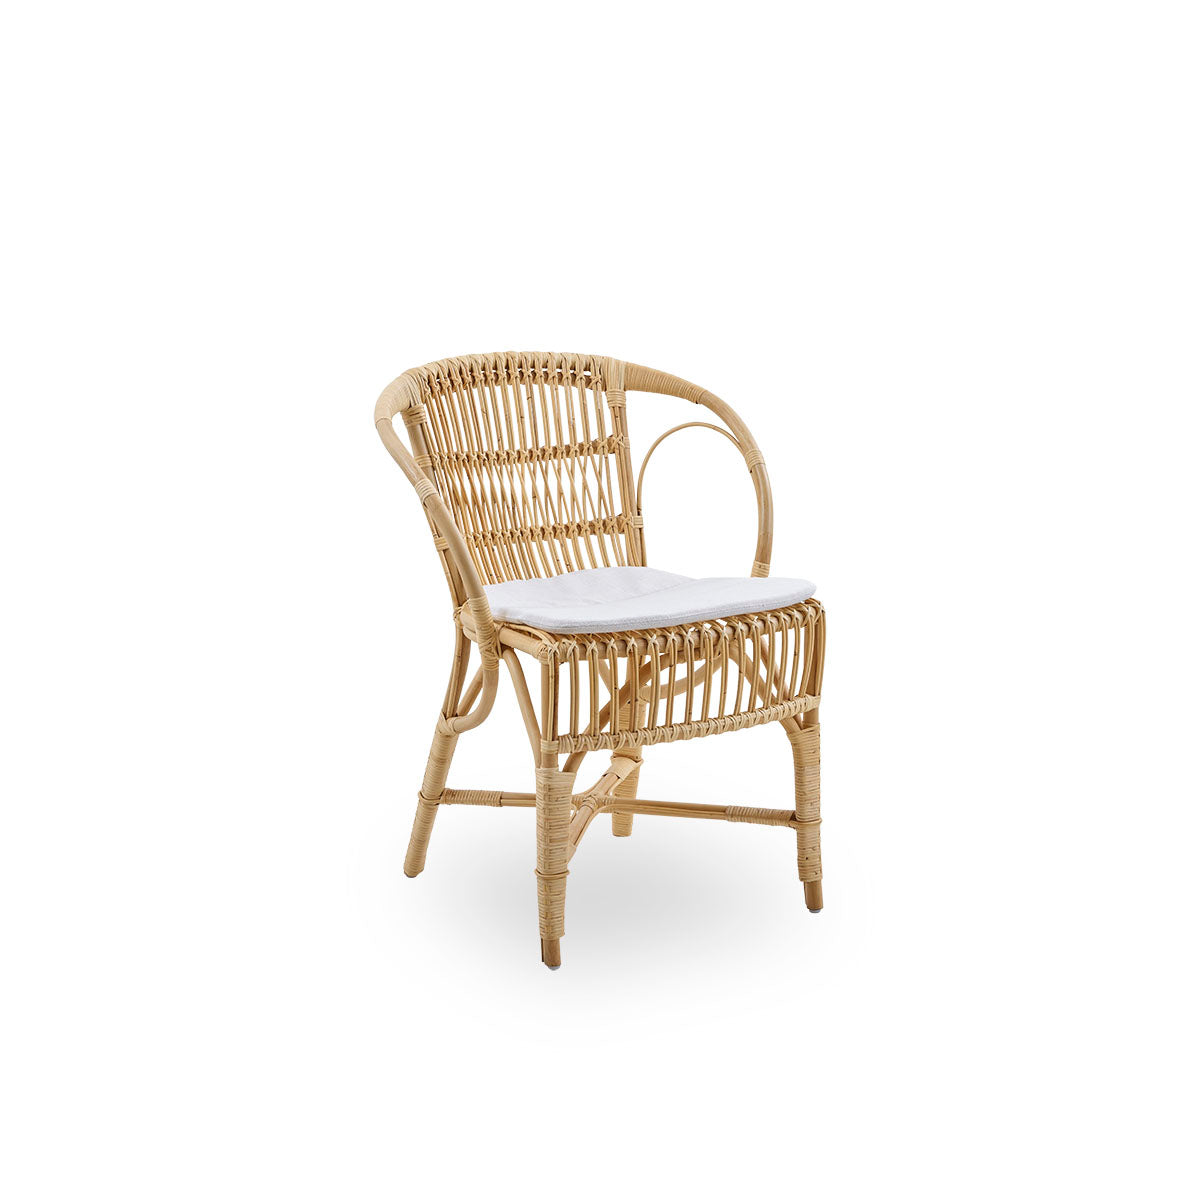 Robert Dining Chair | Seat cushion by Sika